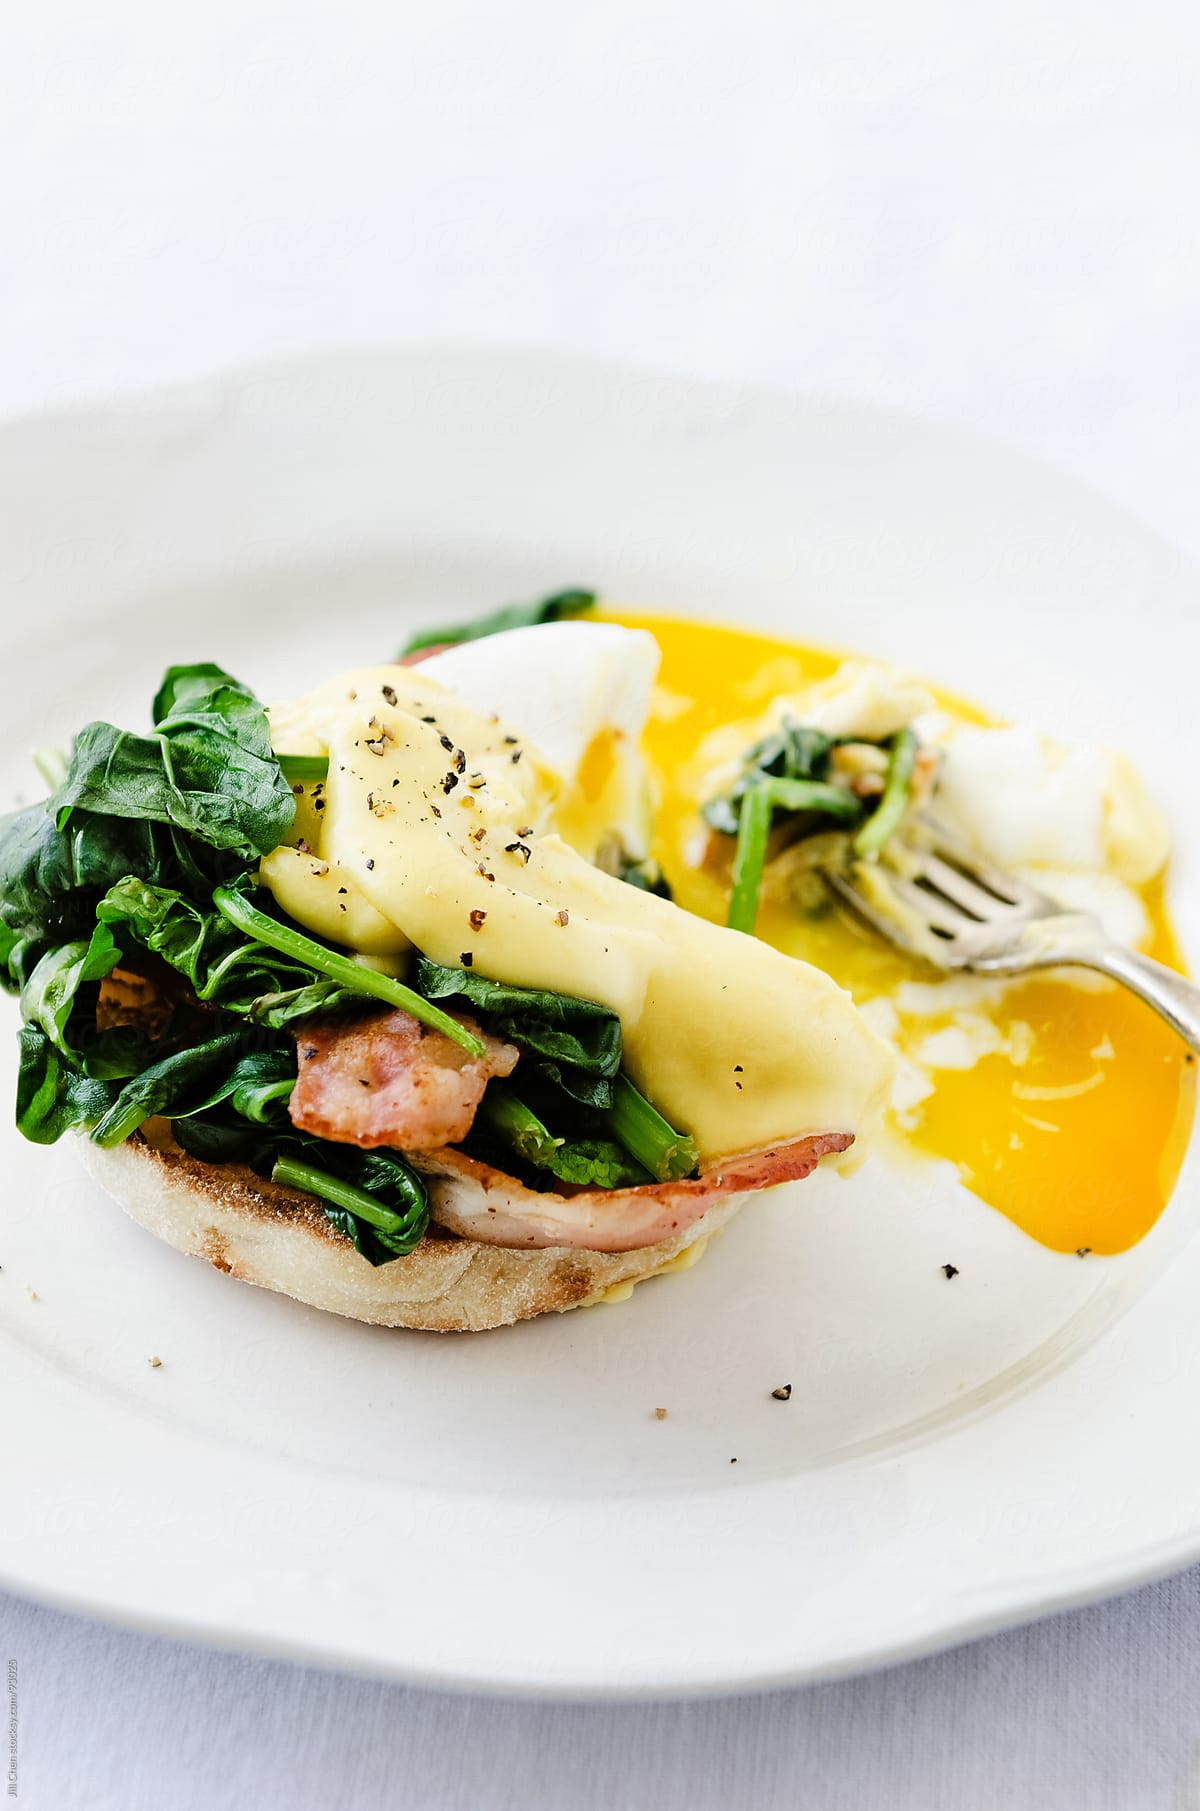 Eggs benedict with hollandaise sauce, spinach and bacon